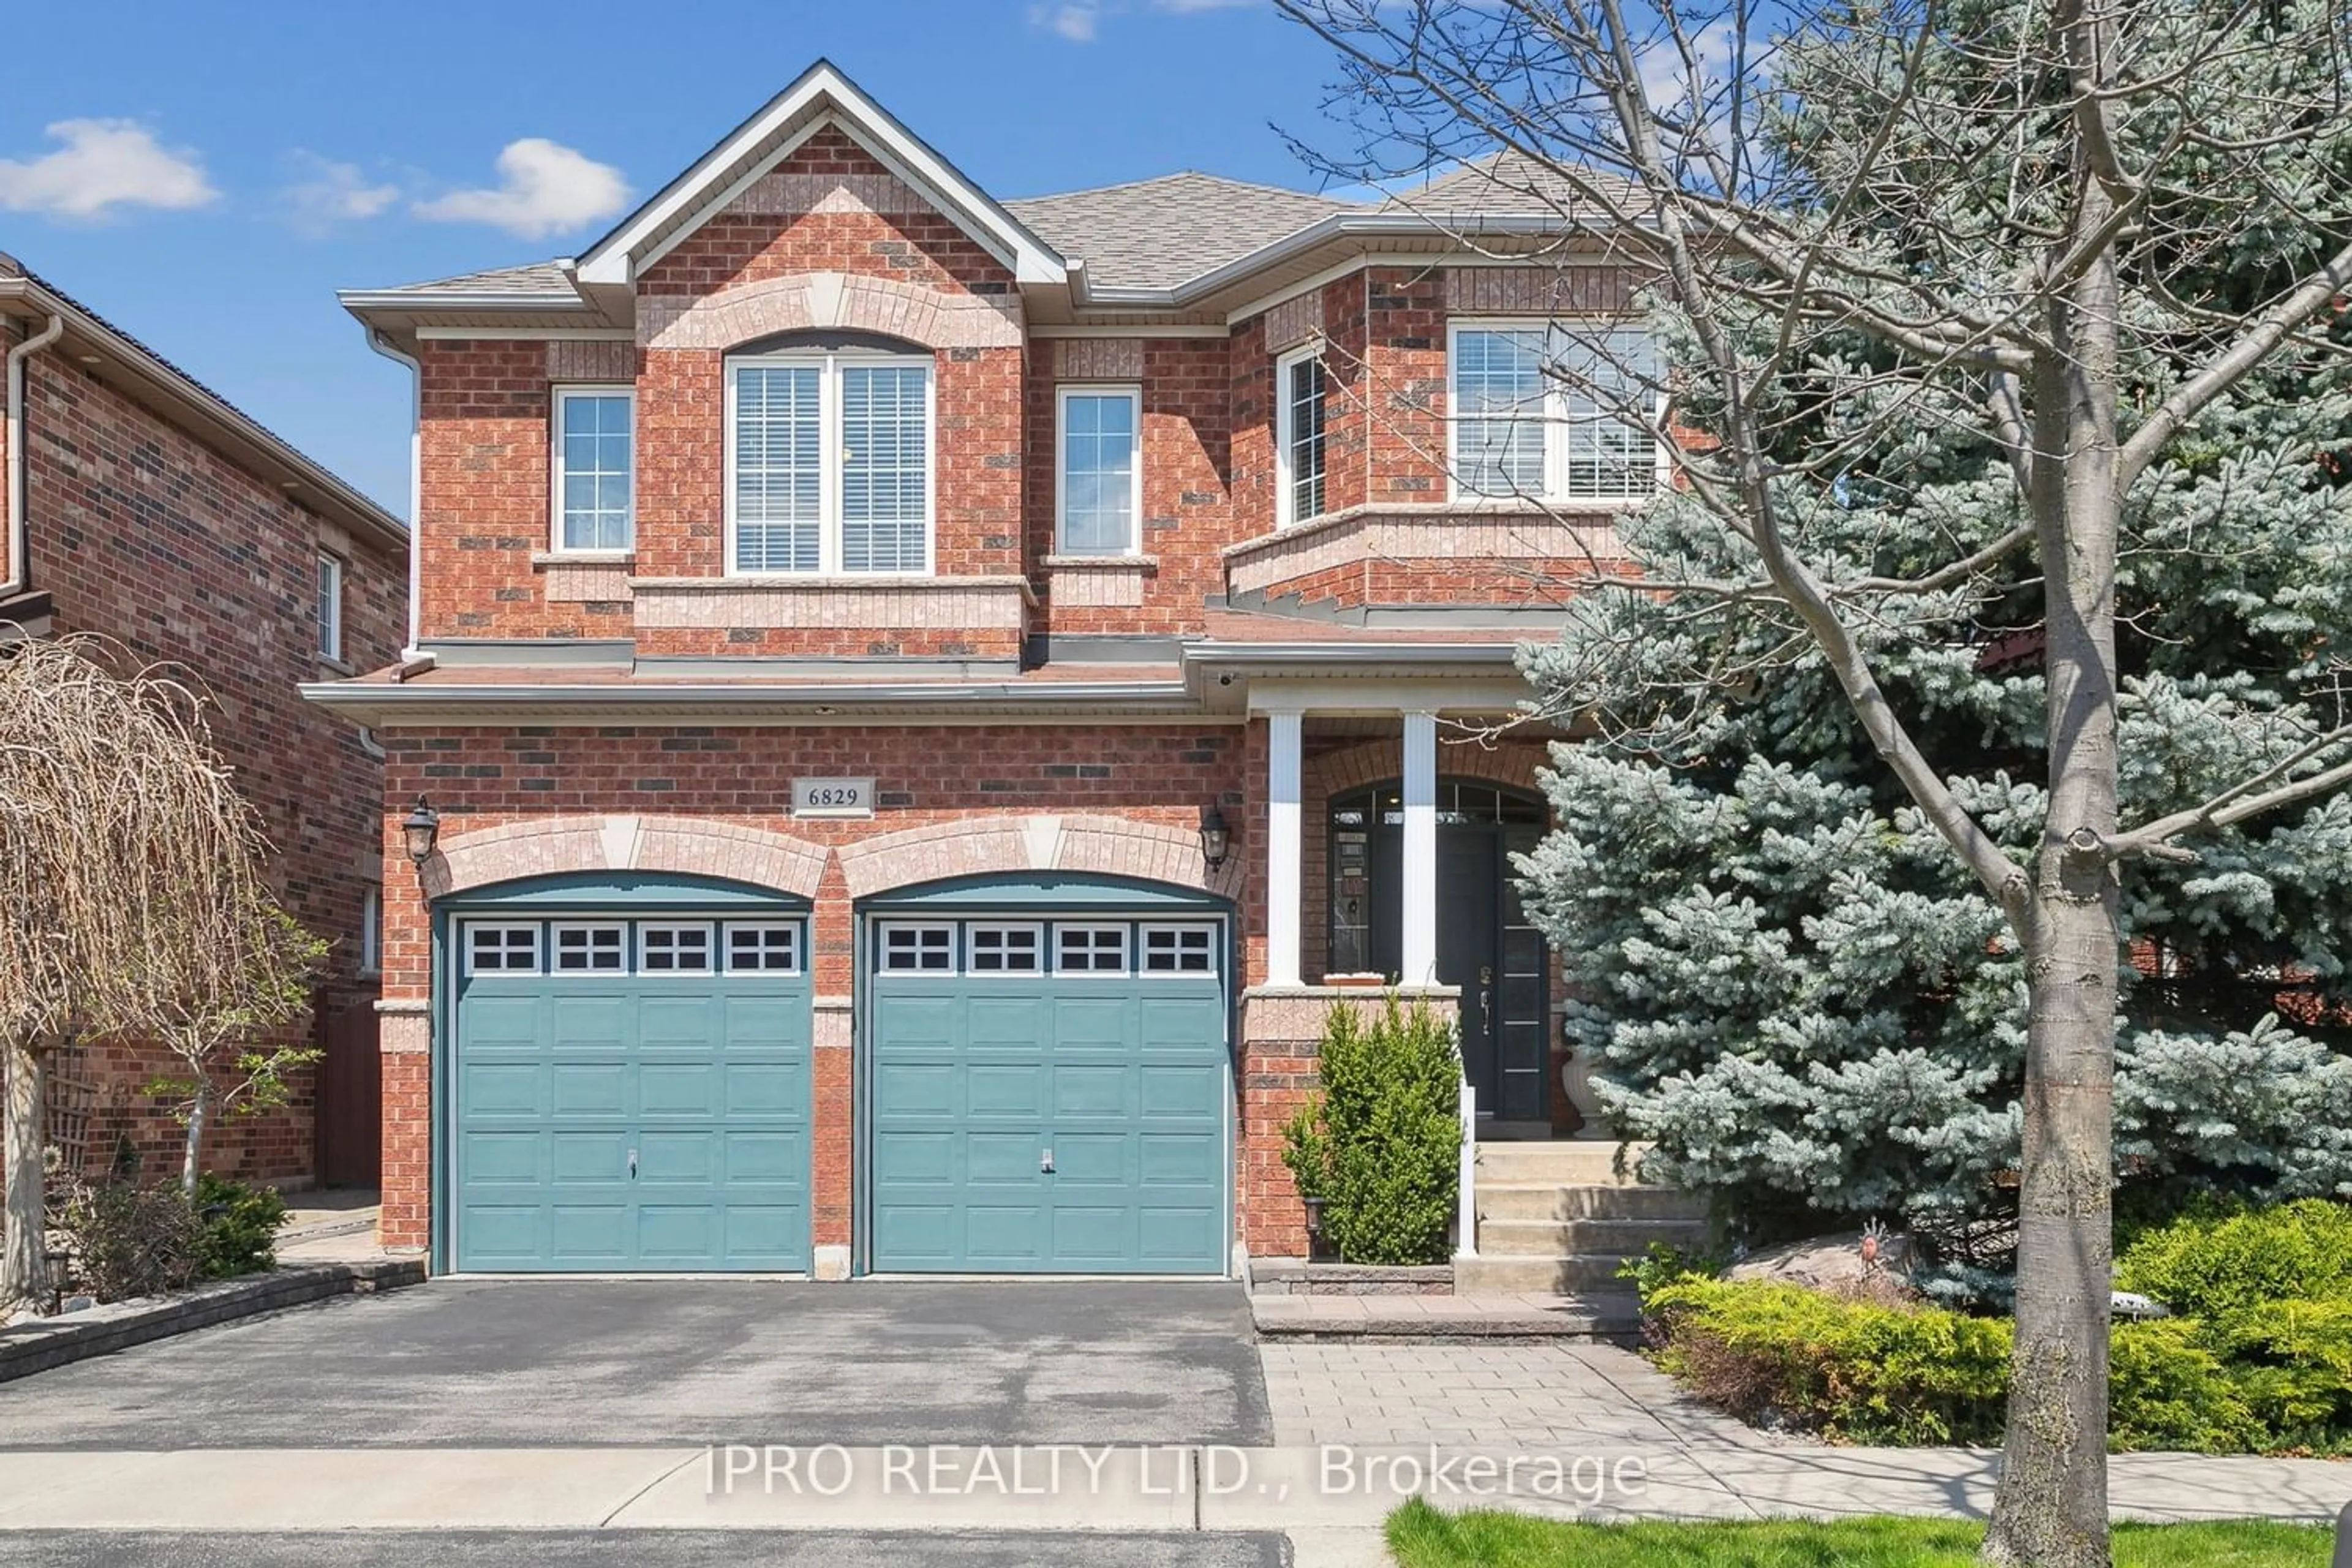 Home with brick exterior material for 6829 Golden Hills Way, Mississauga Ontario L5W 1P3